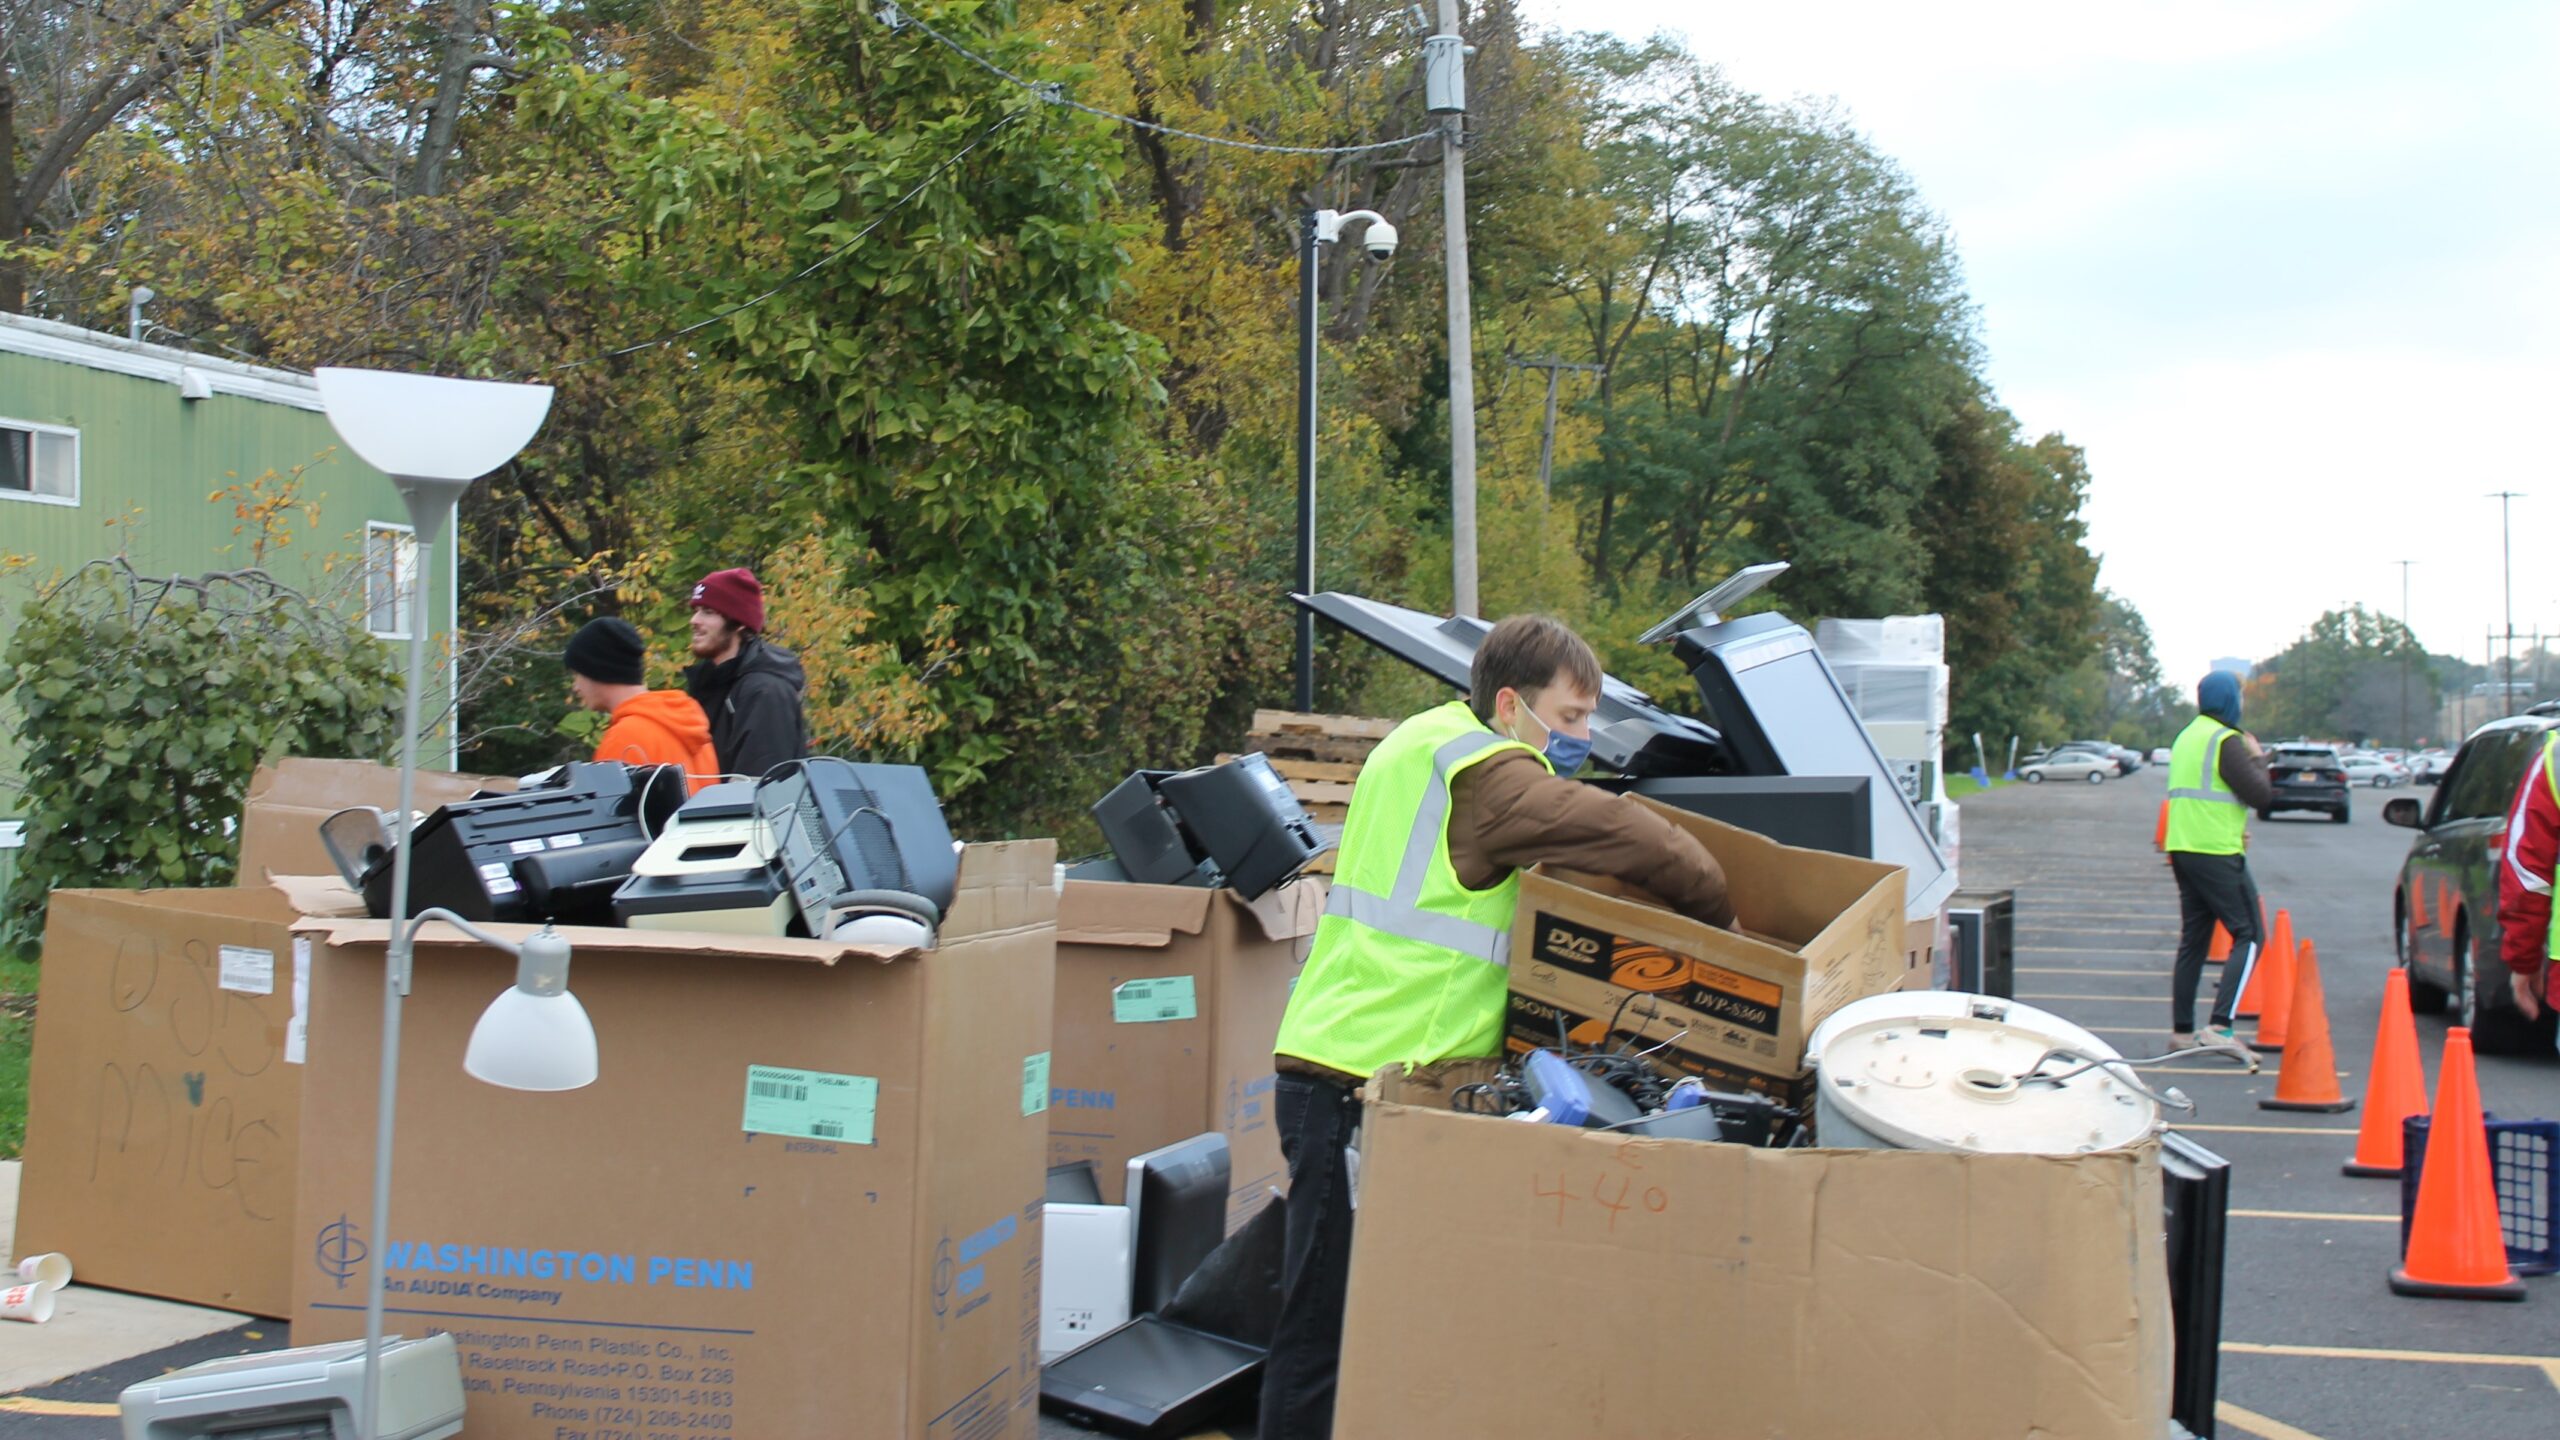 volunteers empty boxes of electronics into large bins and containers to be safely and securely recycled